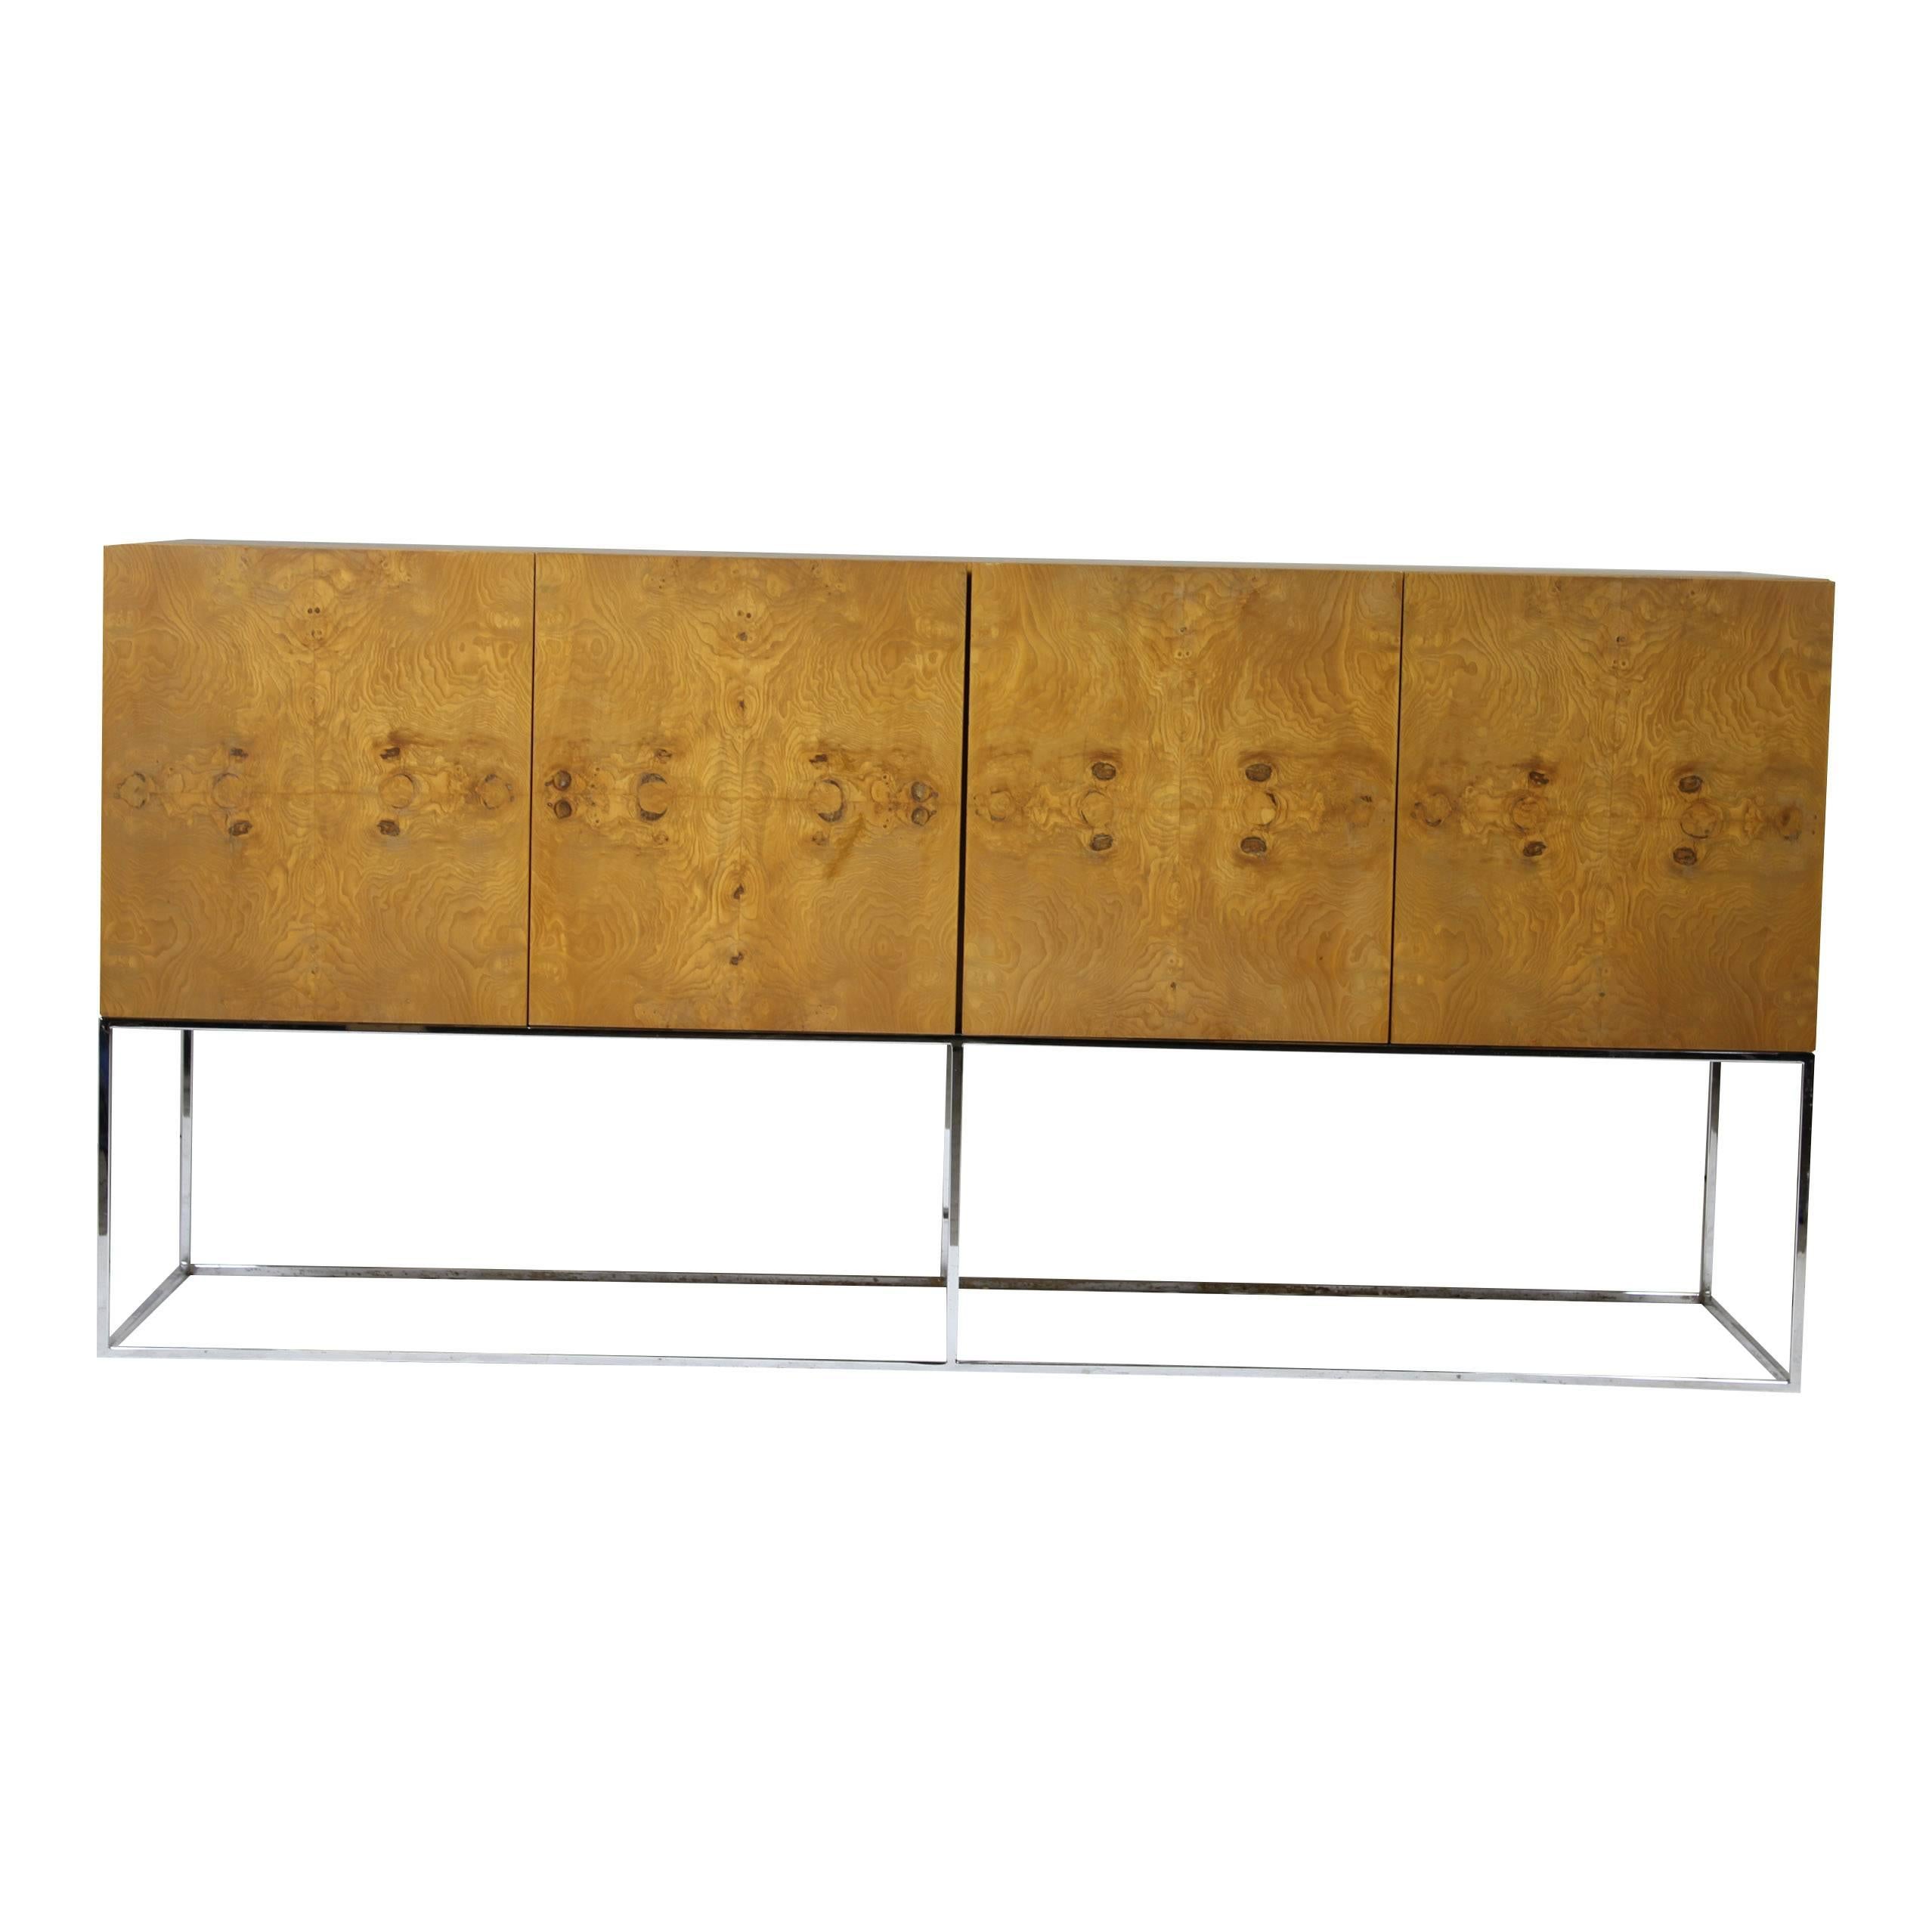 For sale I have a beautiful Milo Baughman for Thayer Coggin sideboard or credenza in bookmatched Olive burl wood veneer on a slim chrome base.

The piece is a beautiful Mid-Century Modern / 1970s statement piece from one of the masters of American